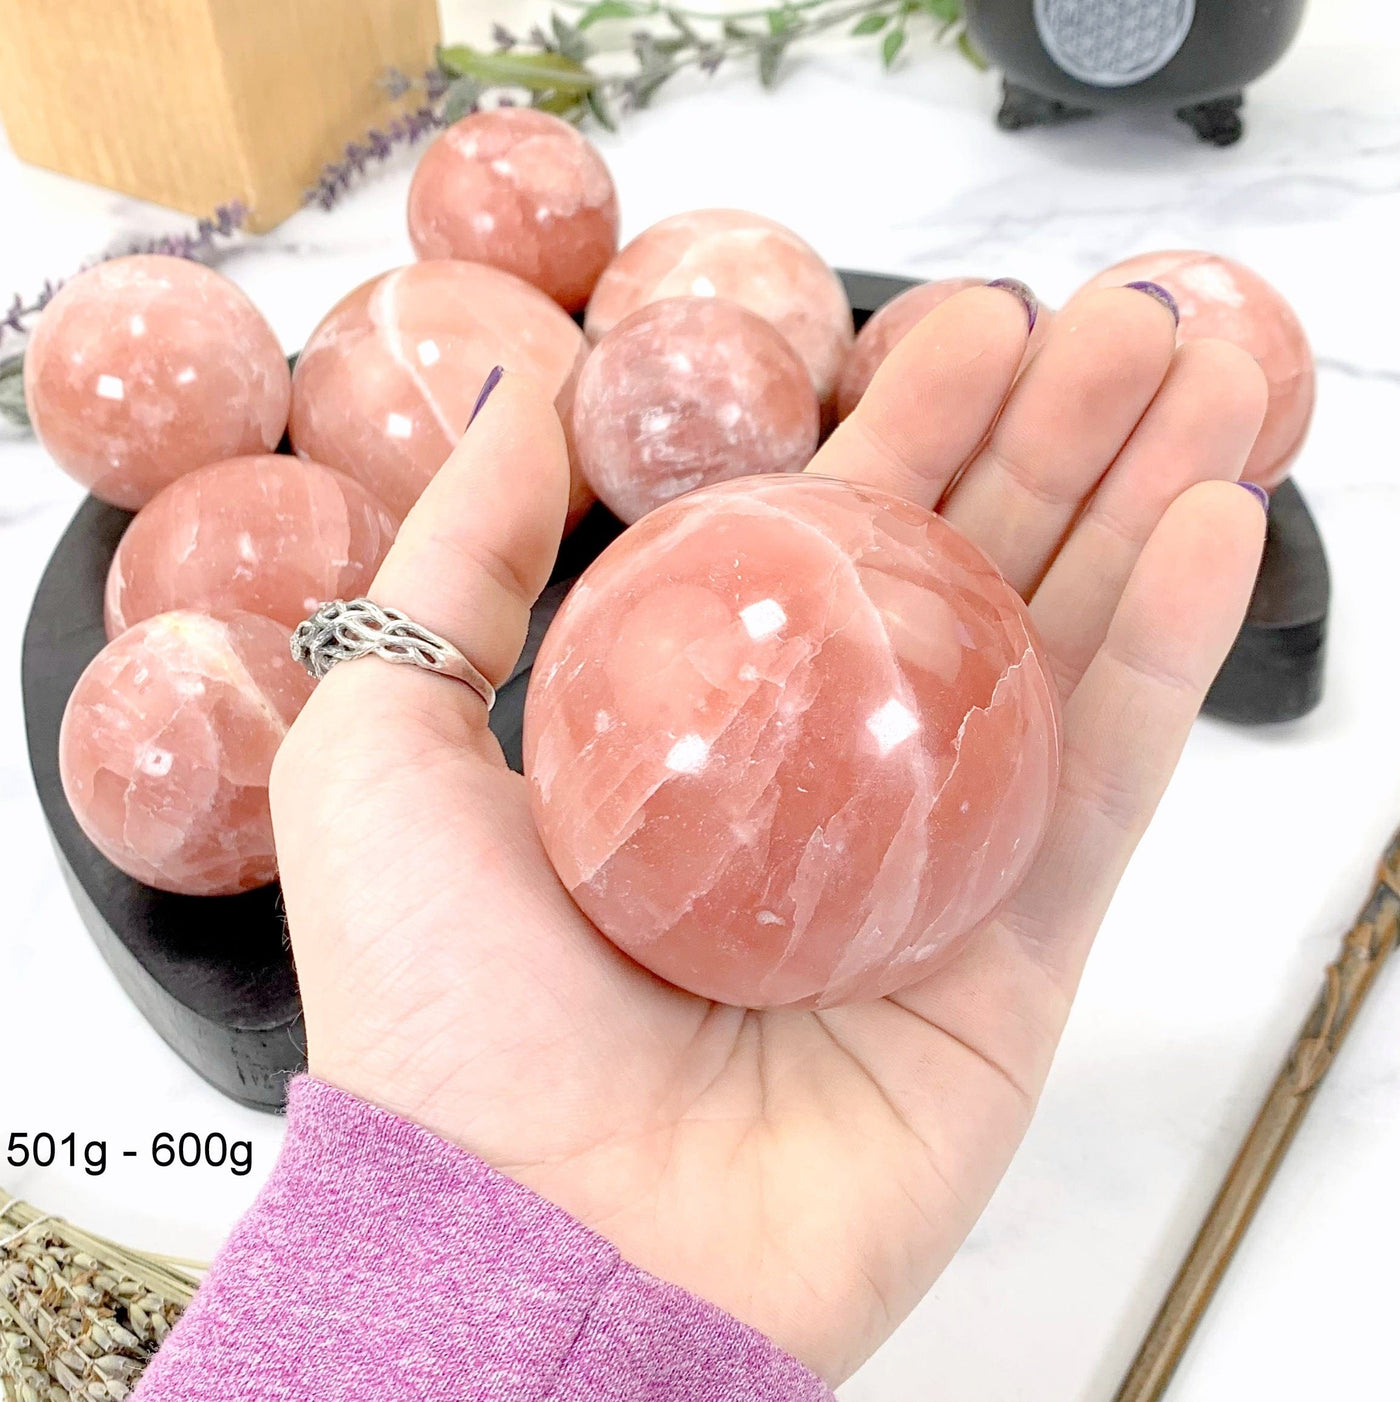 501gram - 600gram rose calcite sphere in hand with marble background